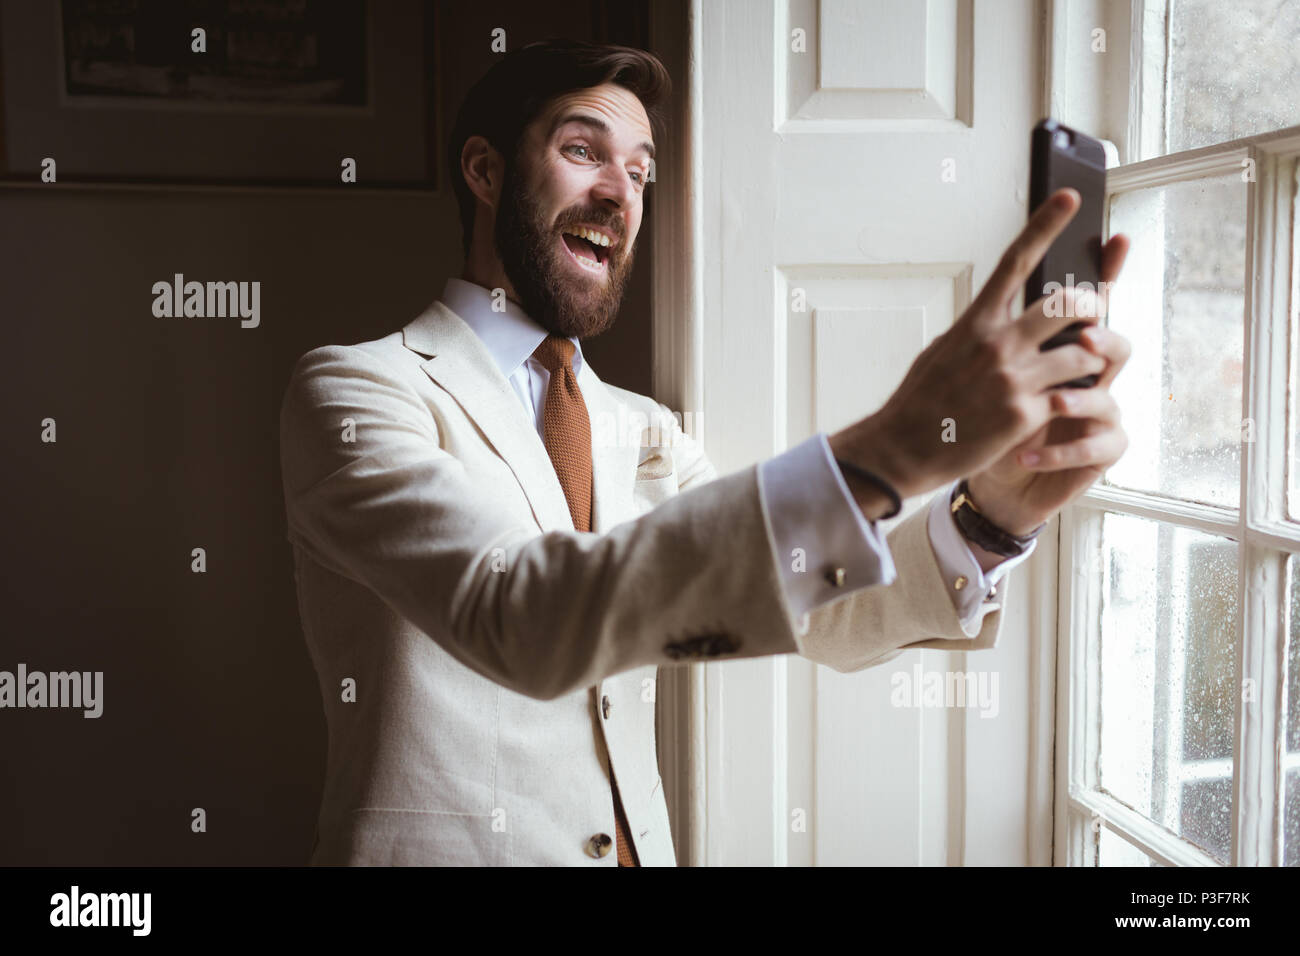 Excited groom taking a selfie near the window Stock Photo